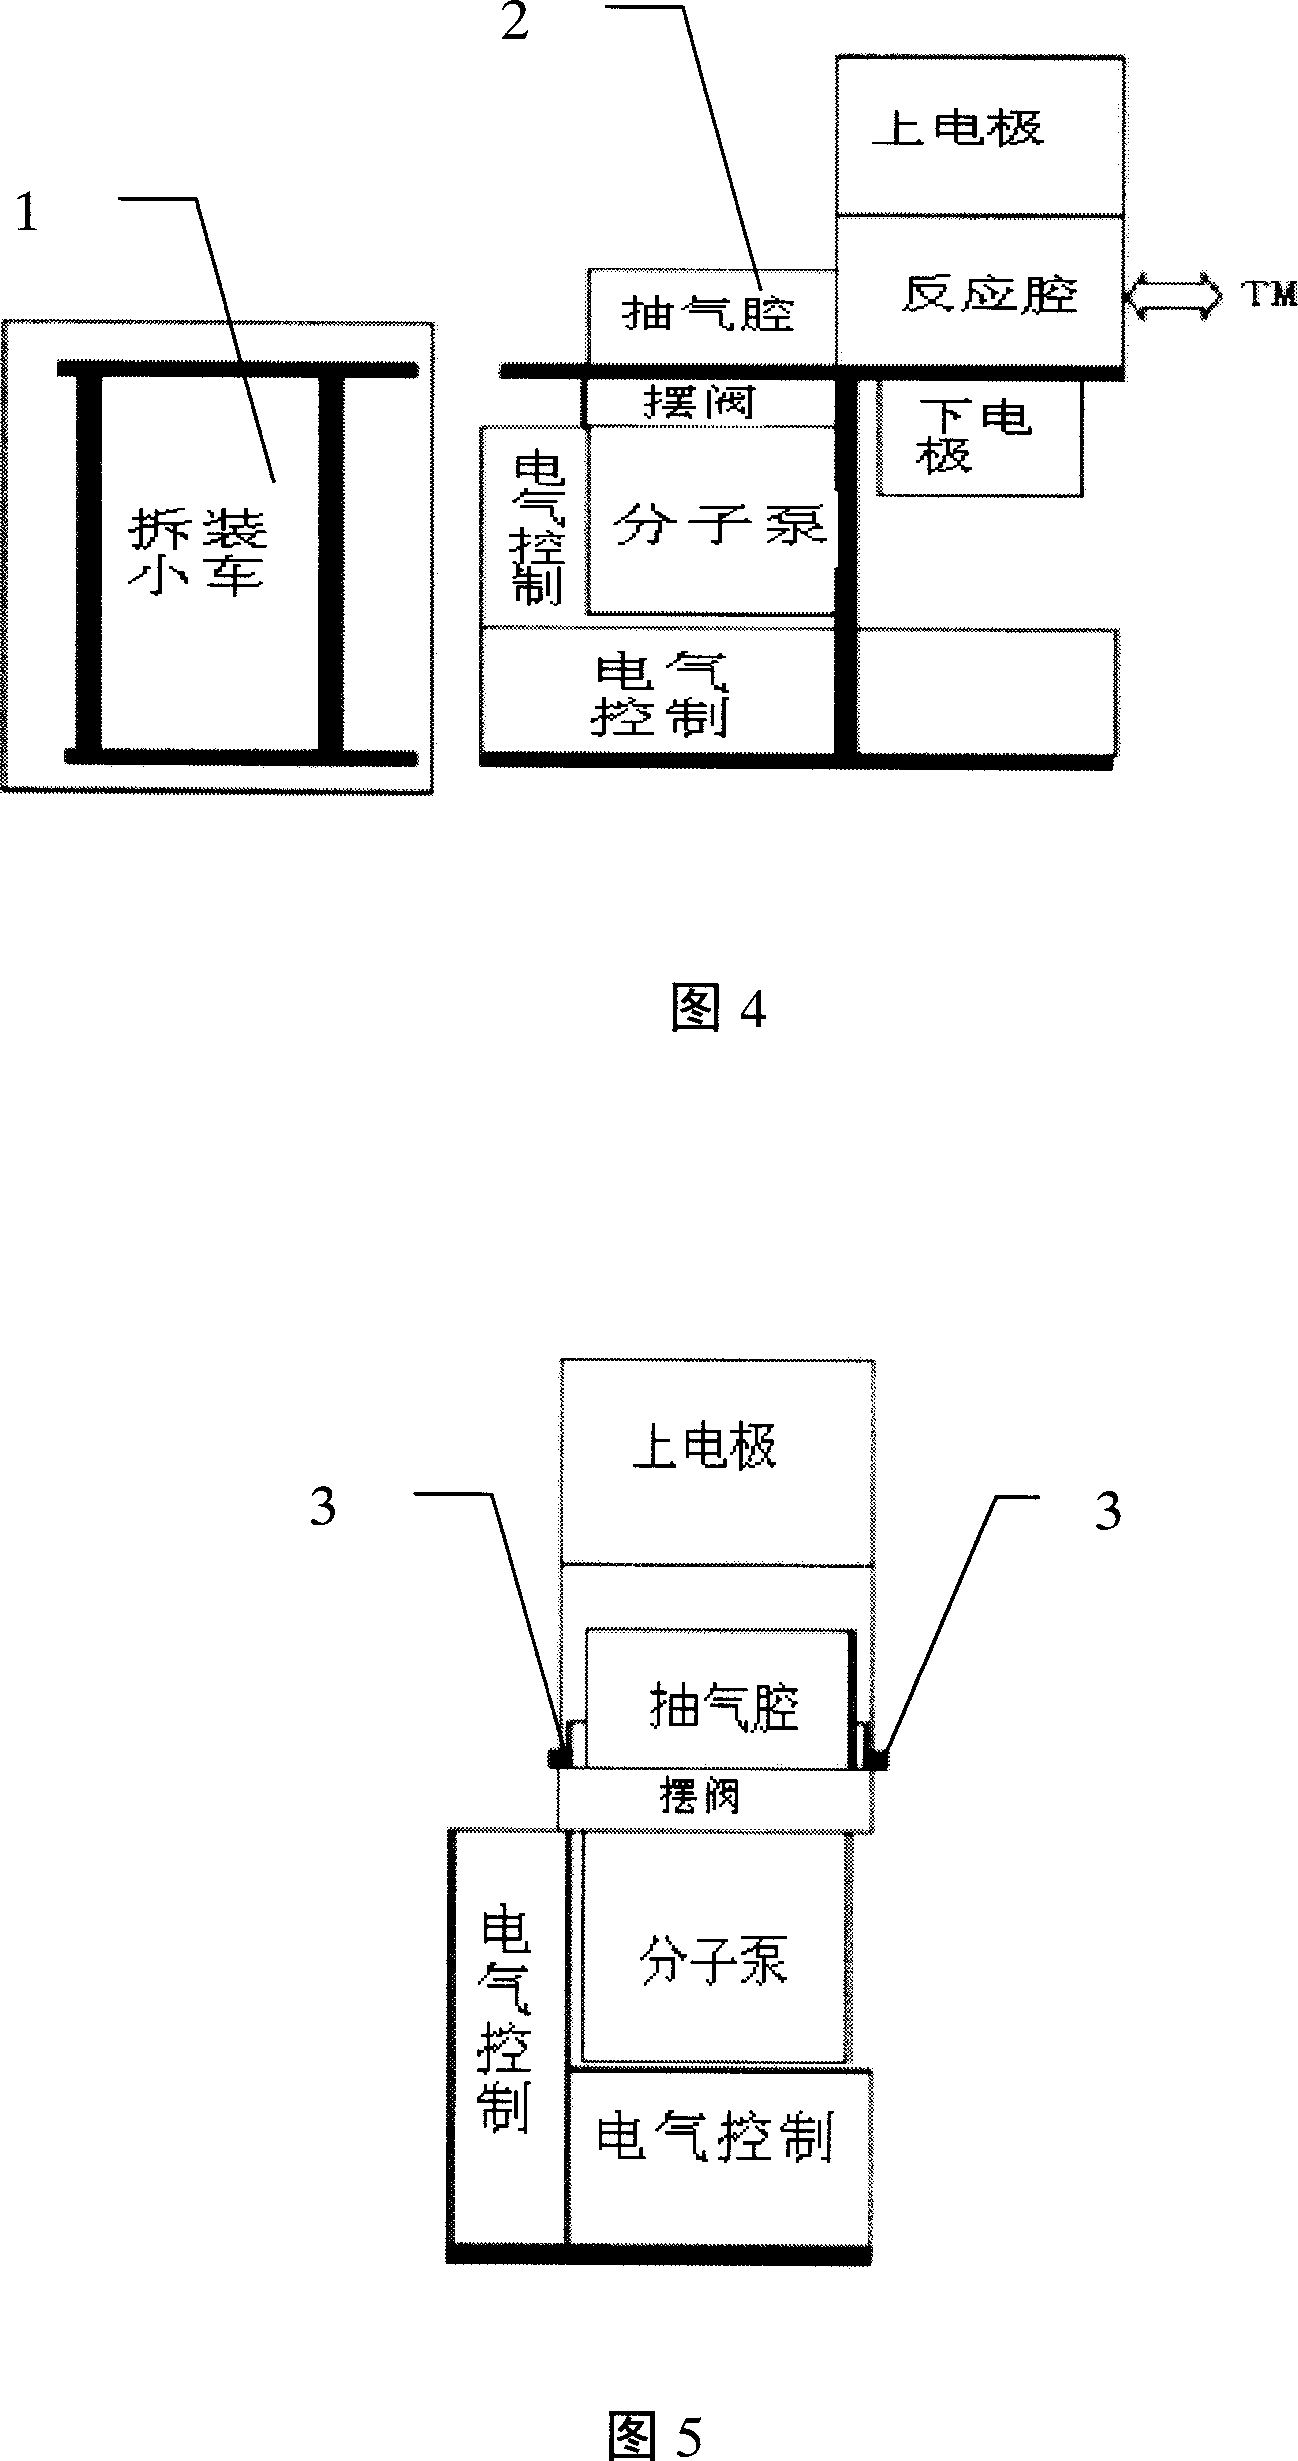 Method for dismounting-mounting semiconductor vacuum-pumping equipment